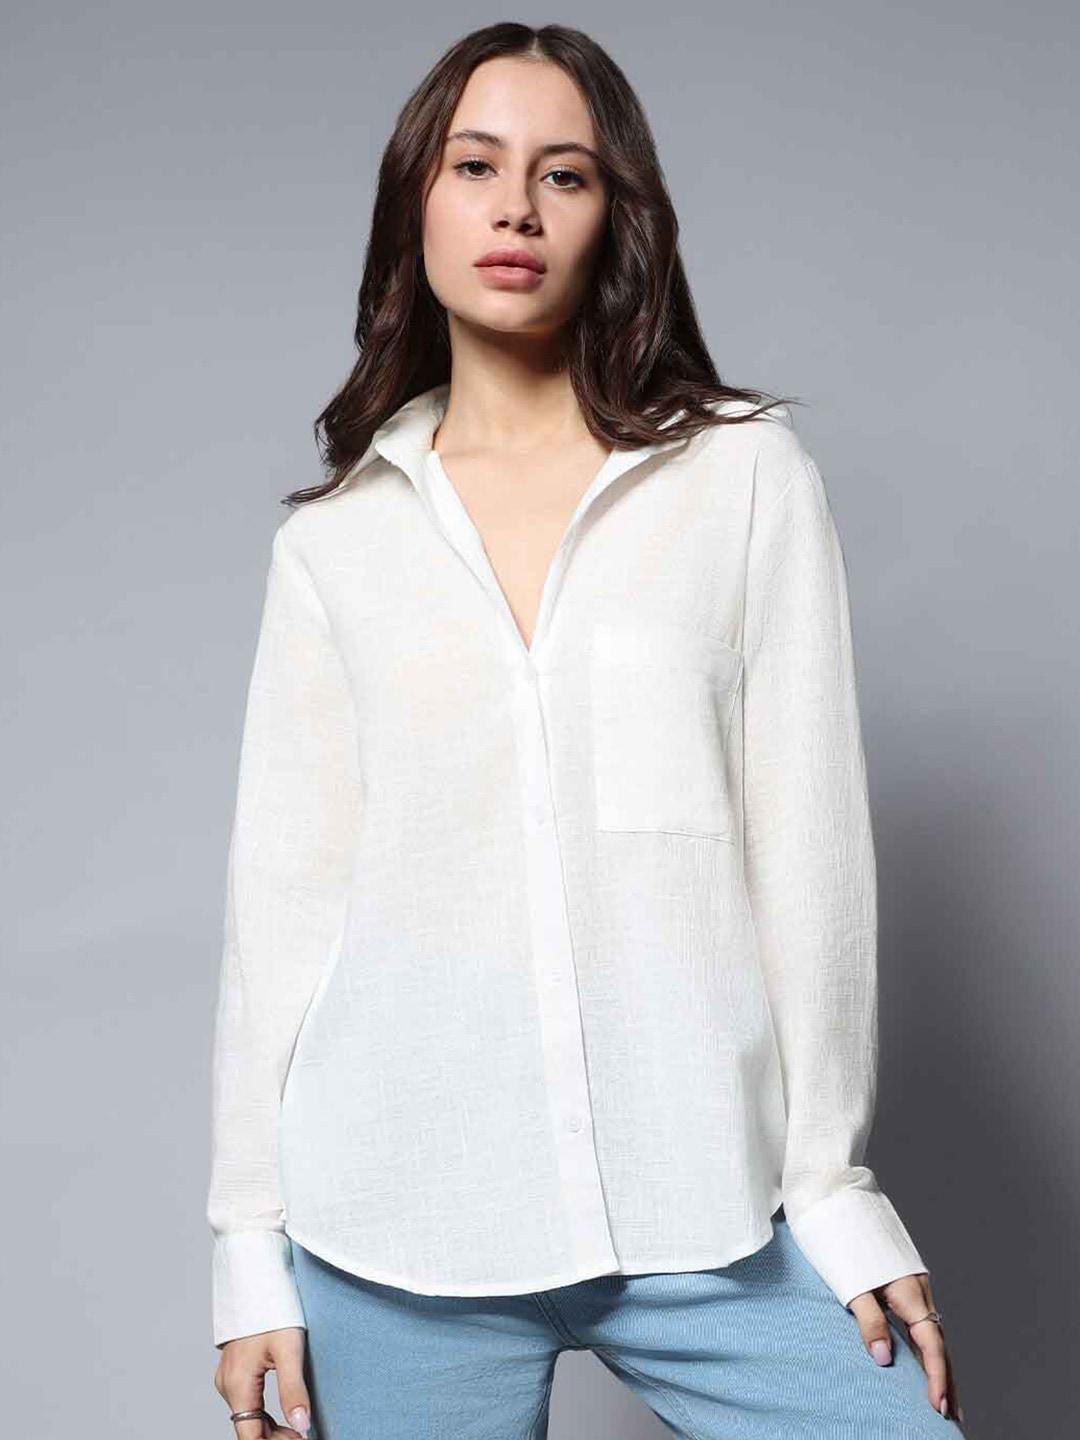 high-star-classic-pure-cotton-oversized-casual-shirt